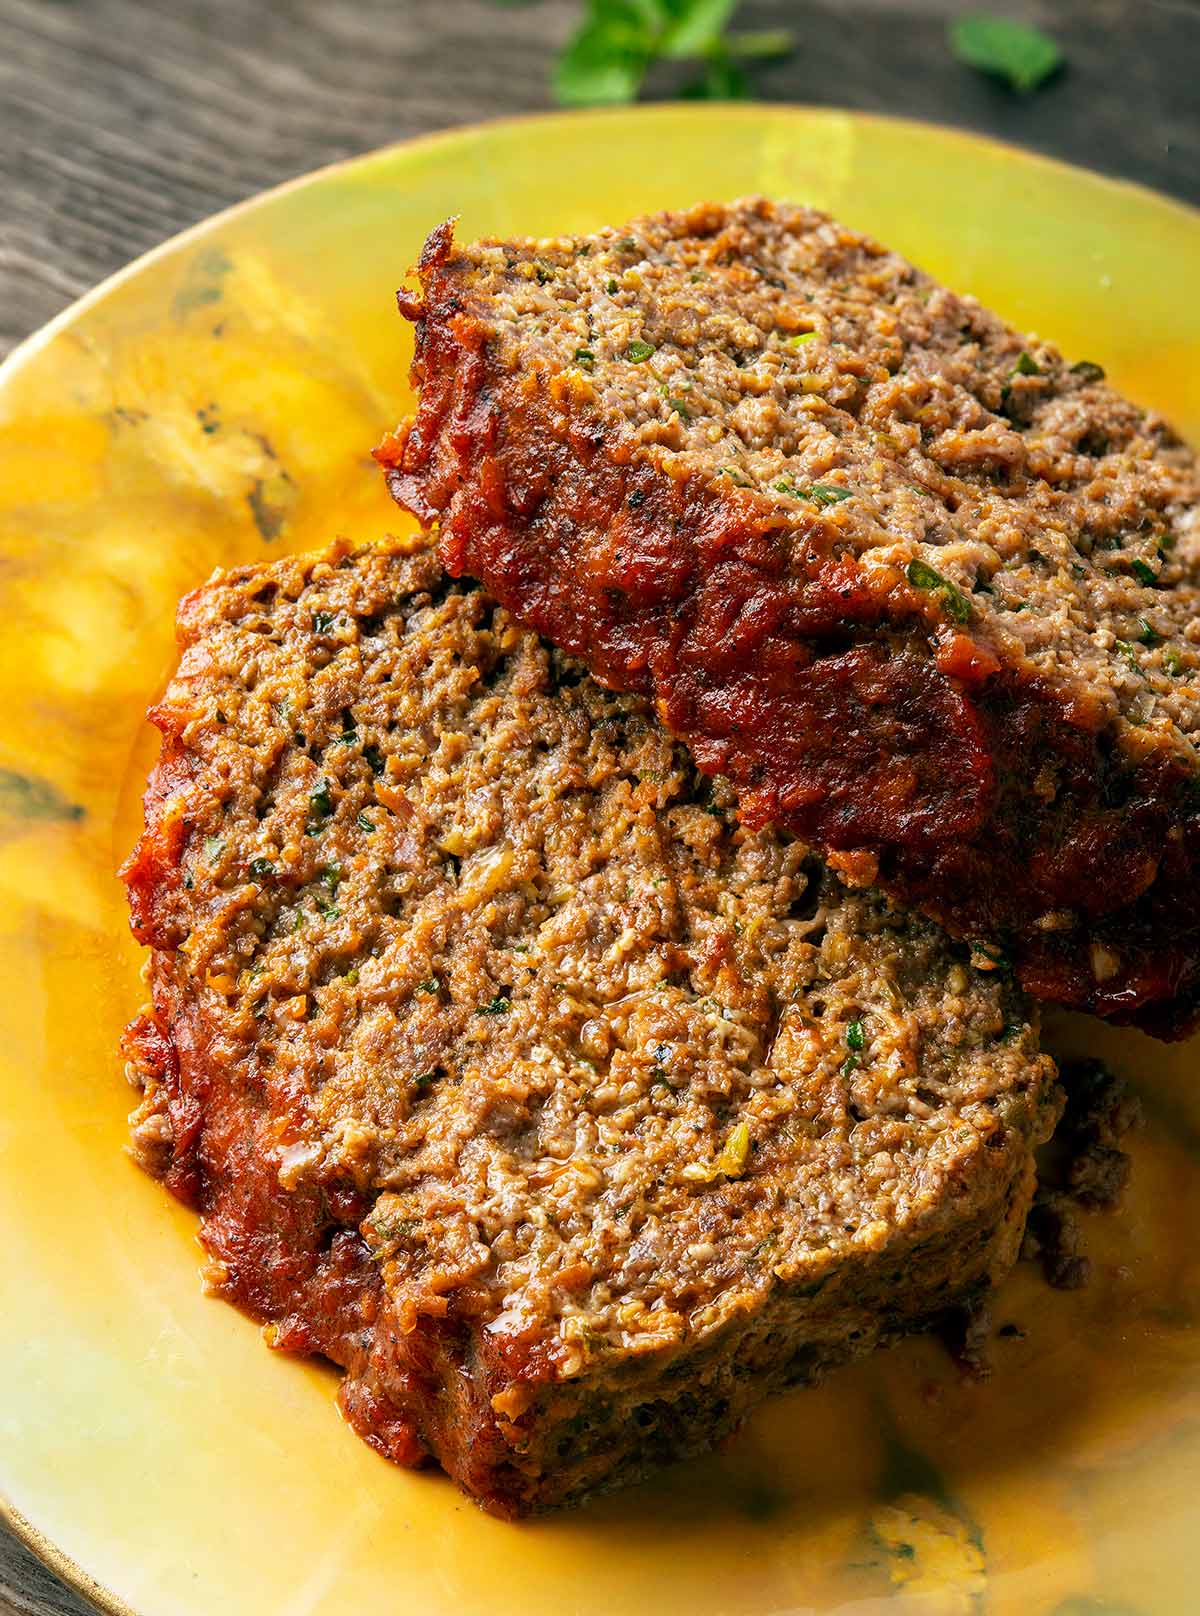 Close up of two slices of venison meatloaf.